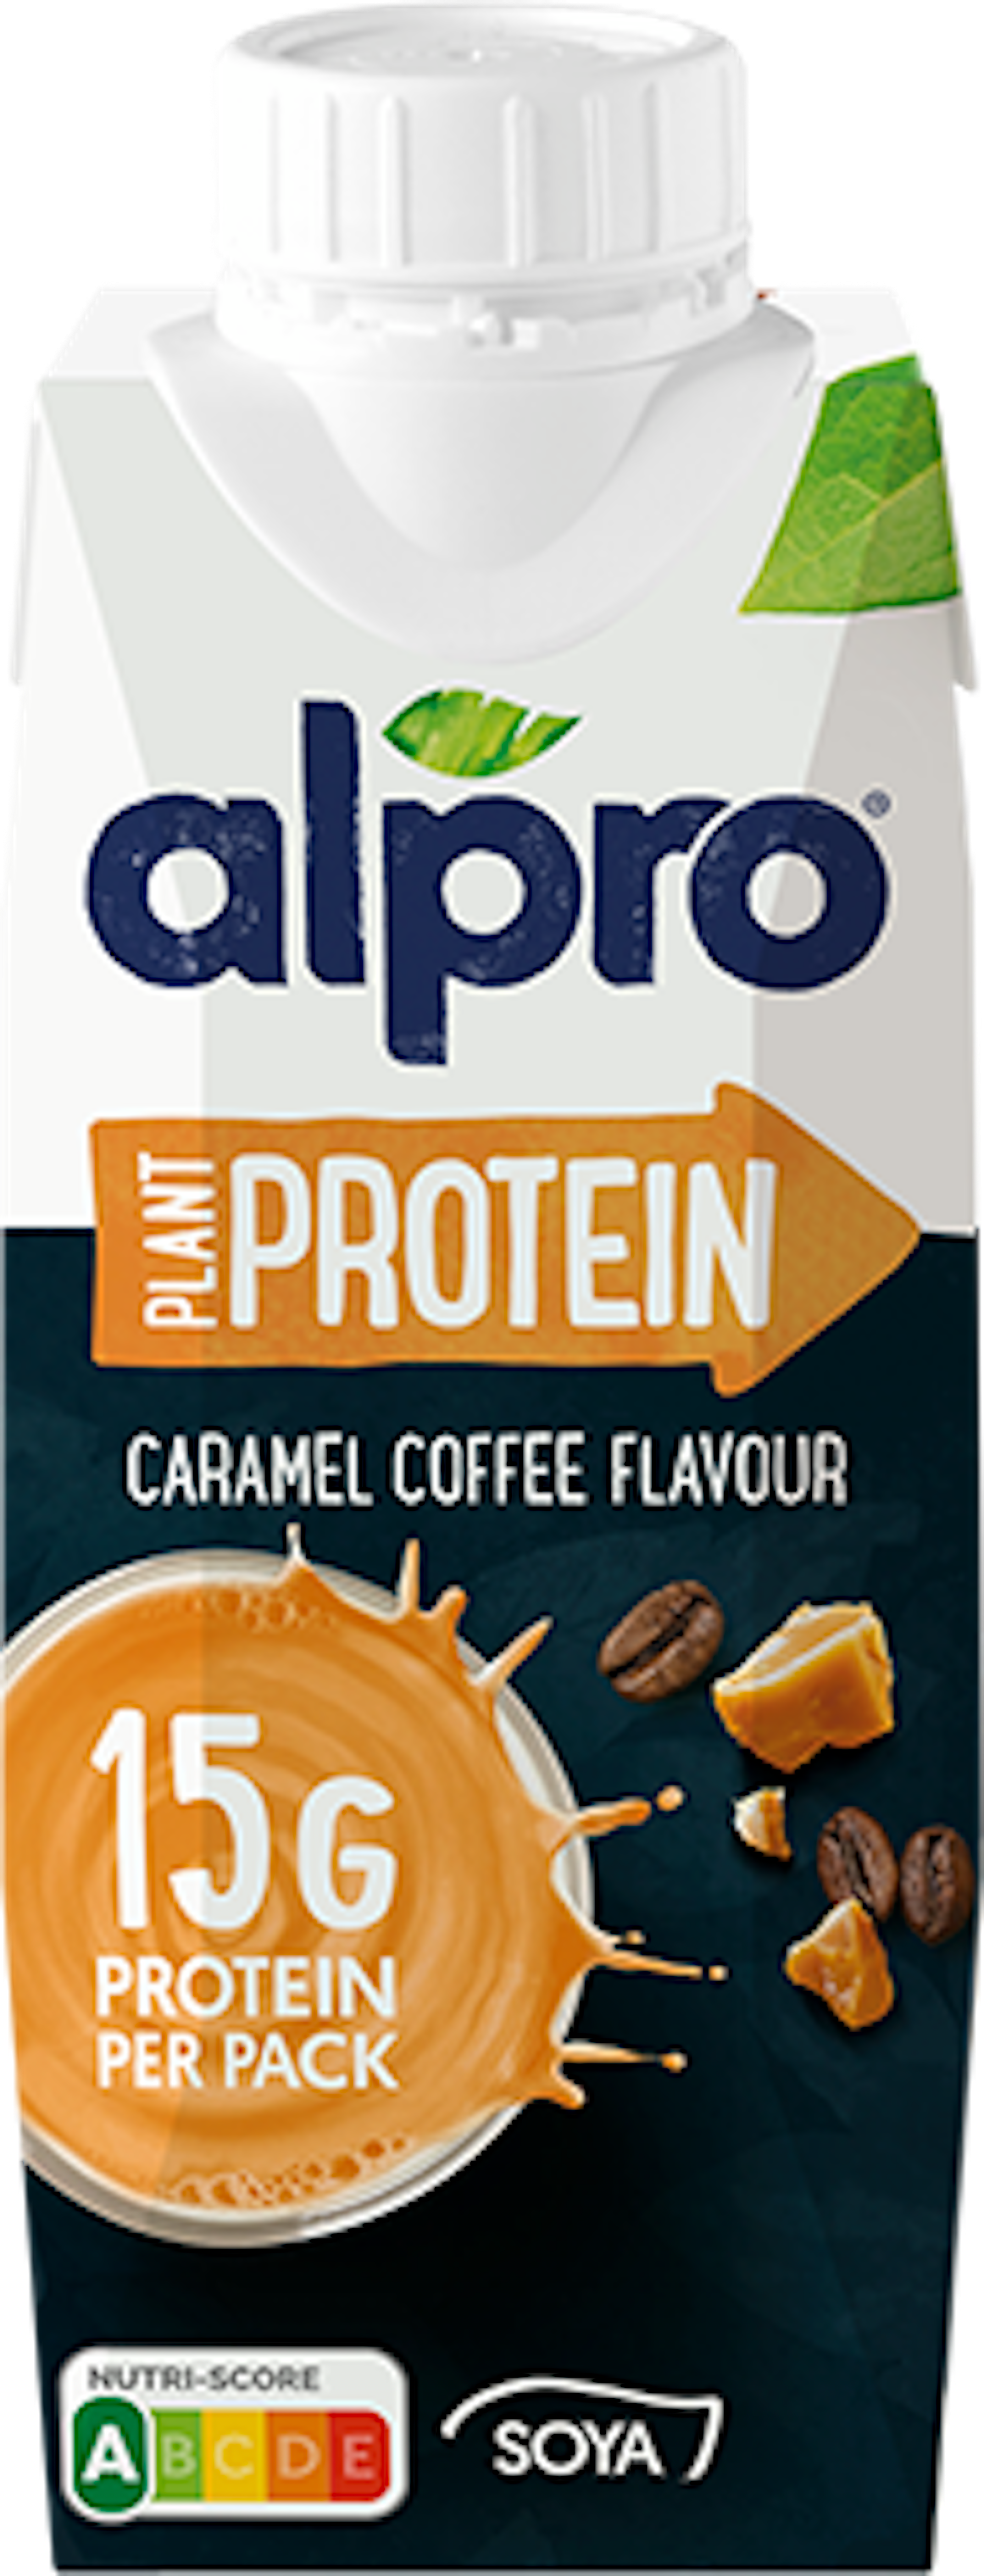 Alpro Protein Caramel Coffee Flavour